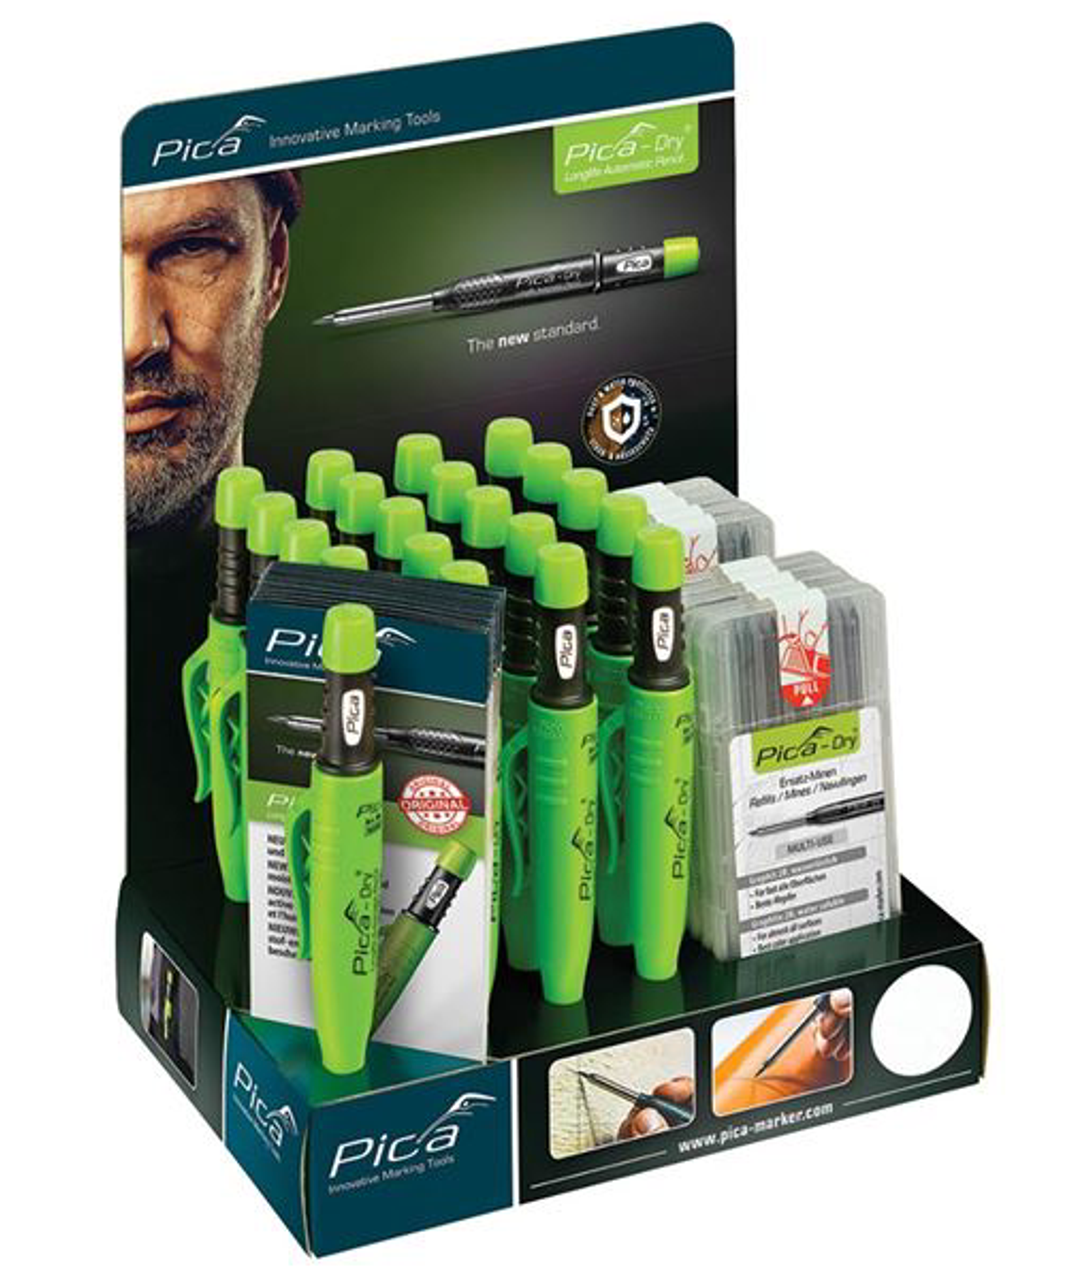 Pica Dry Automatic Marker, Dry : Office Products, pica dry 